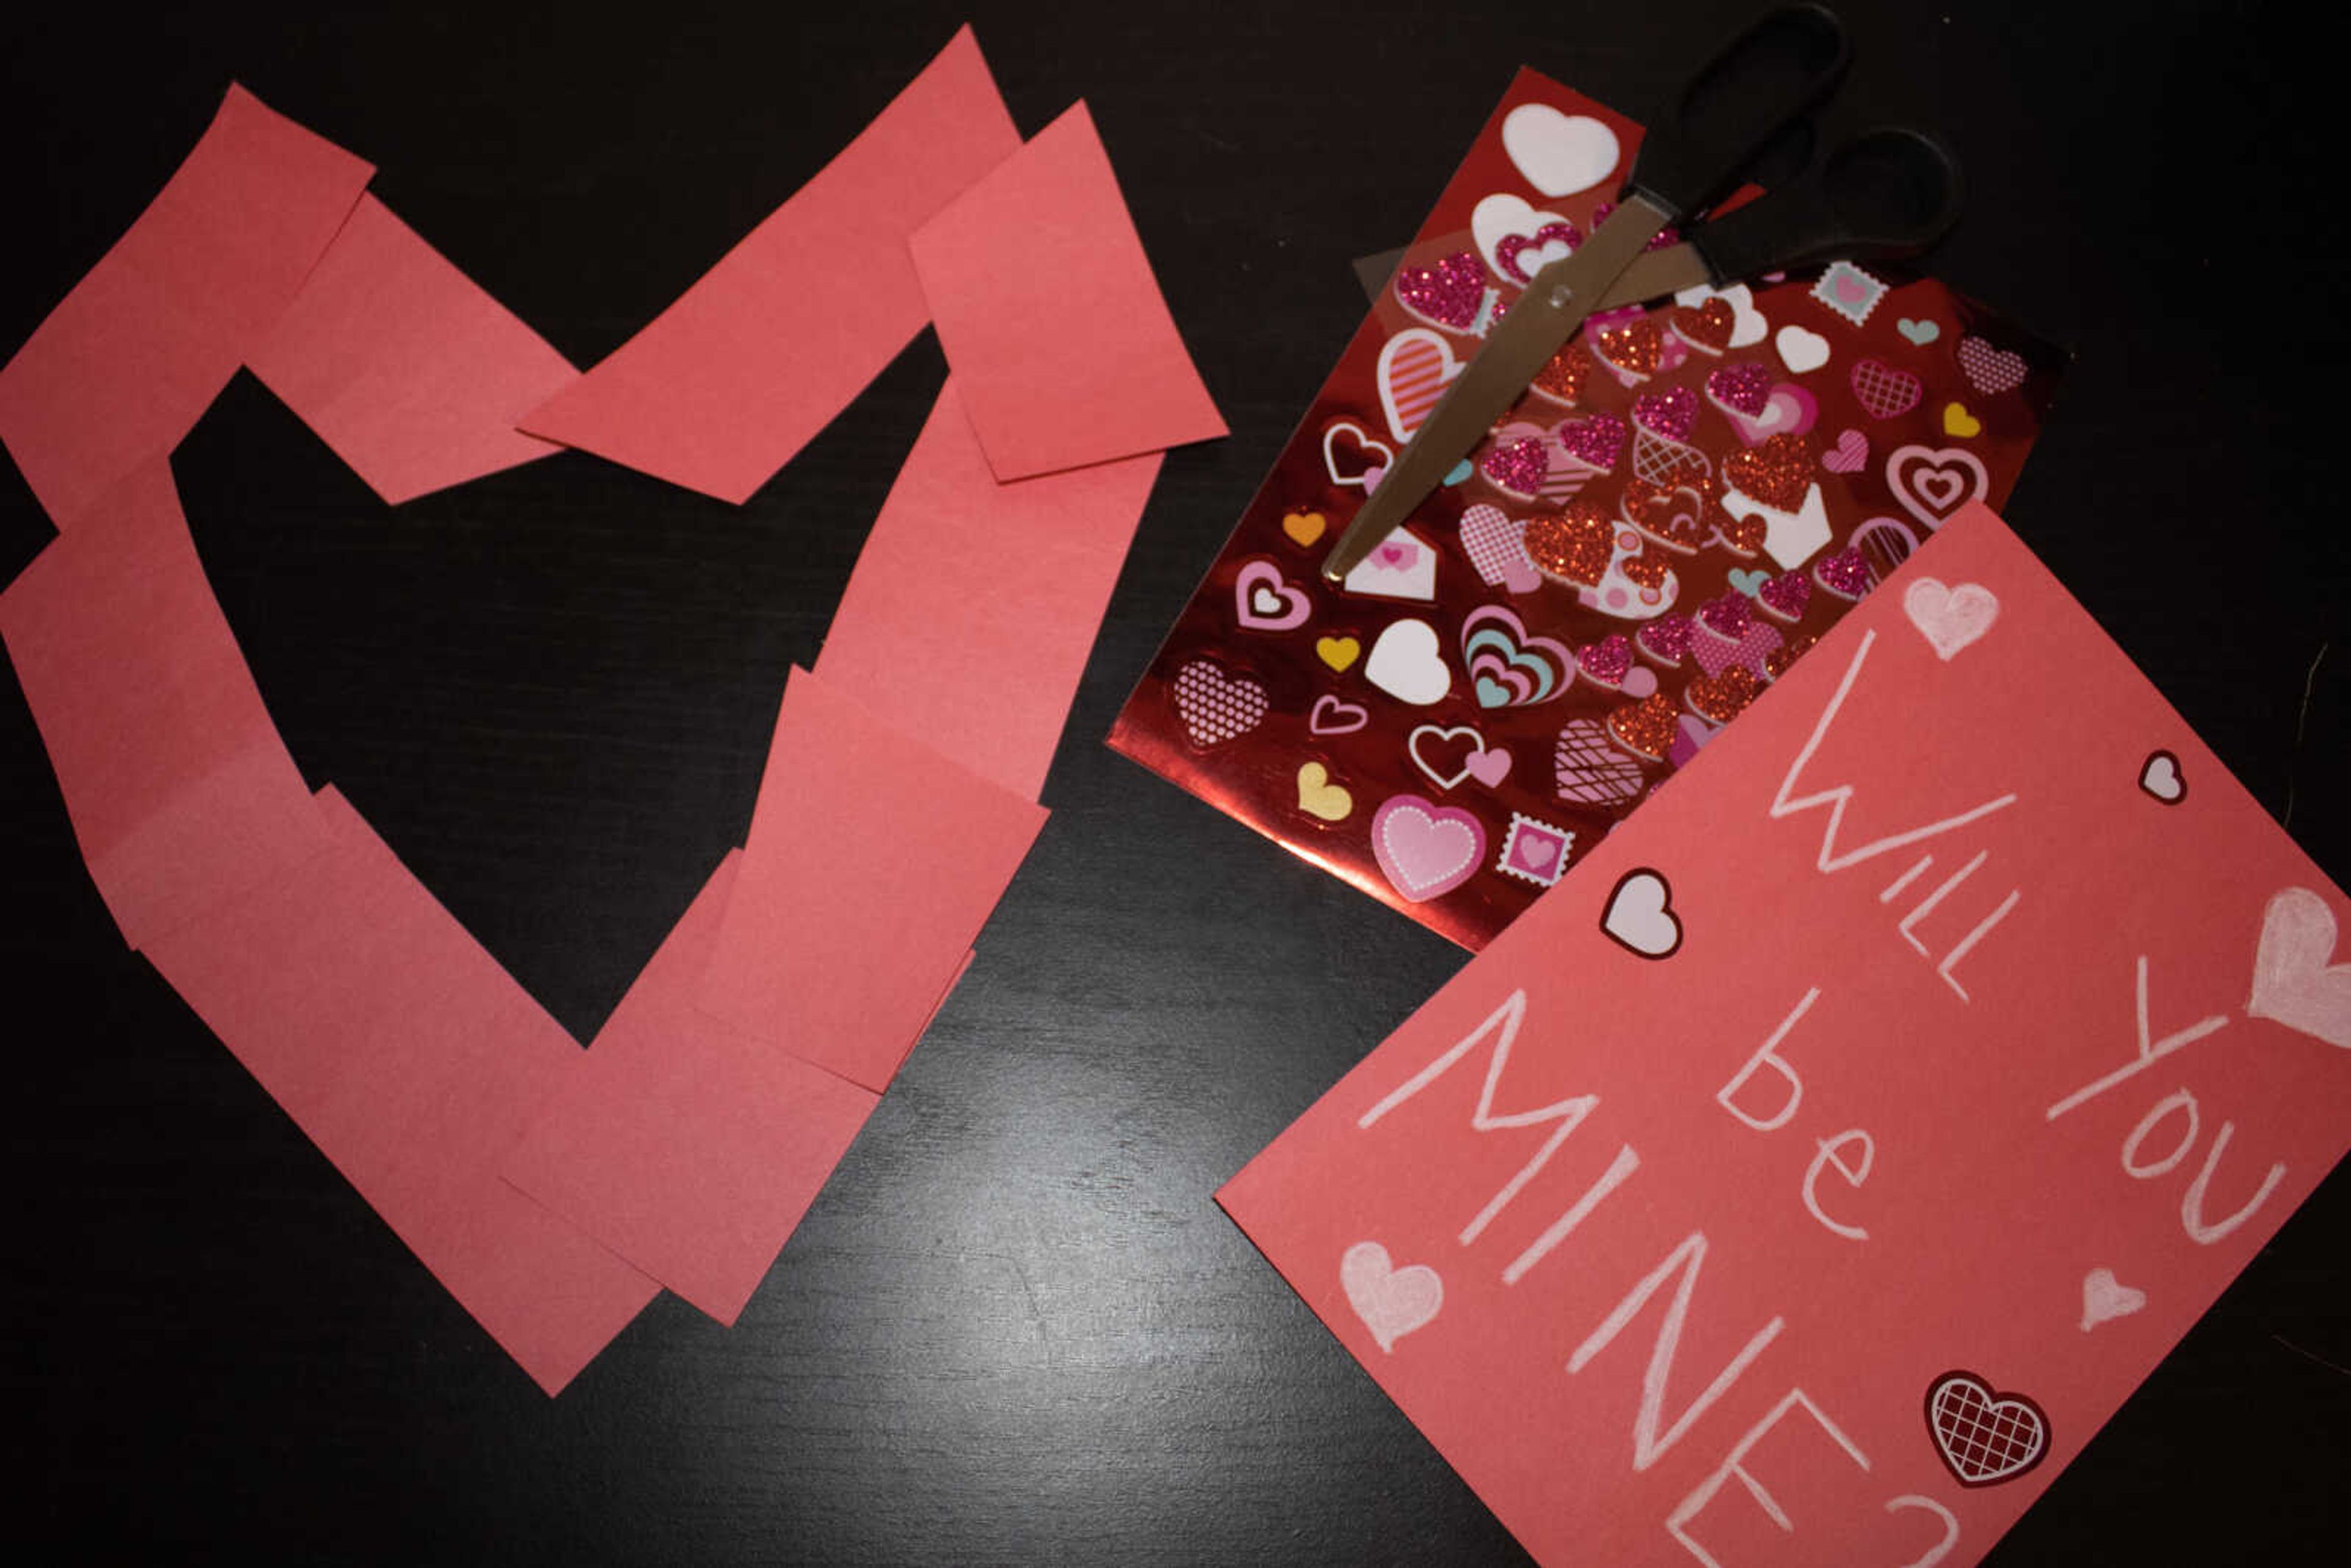 DIY Valentines Day gifts can be made with paper from home at little to no cost. According to an article by Good Housing Keeping, the traditional color of the red rose symbolizes love.